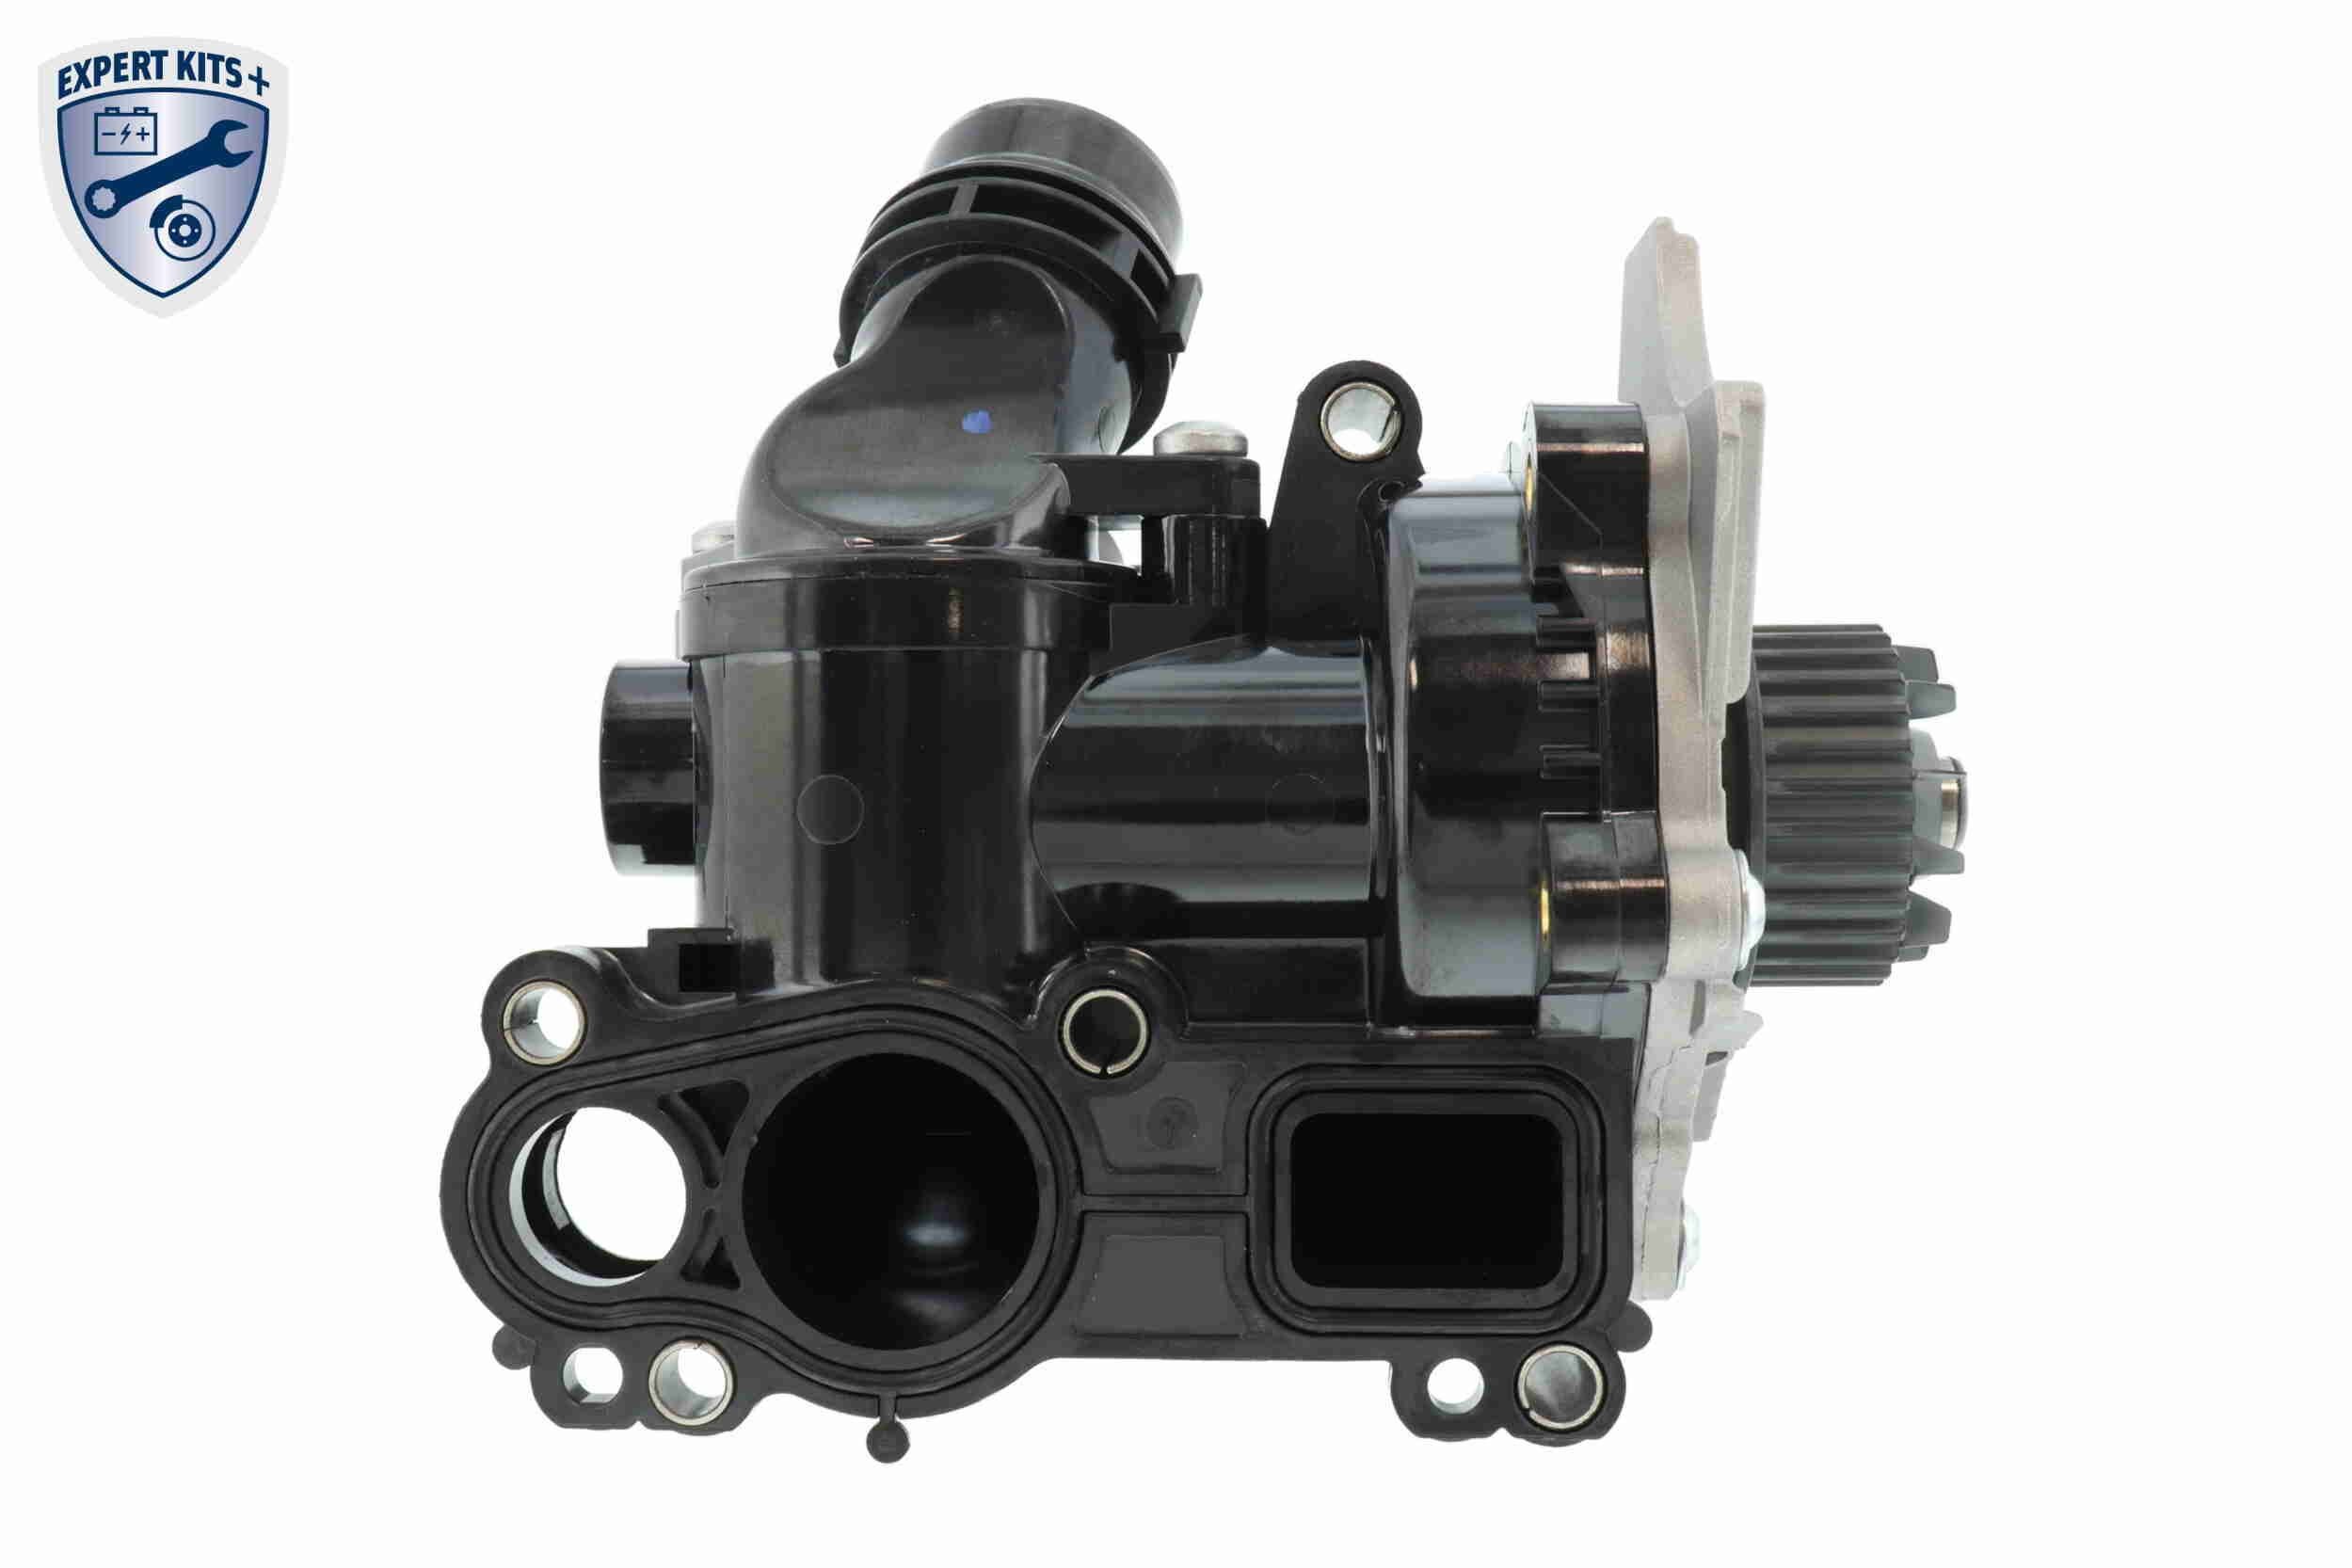 VAICO V10-50091 Water pump Number of Teeth: 29, with seal, with thermostat, with bracket, without sensor, with coolant regulator, Grey Cast Iron, Metal, EXPERT KITS +, with housing